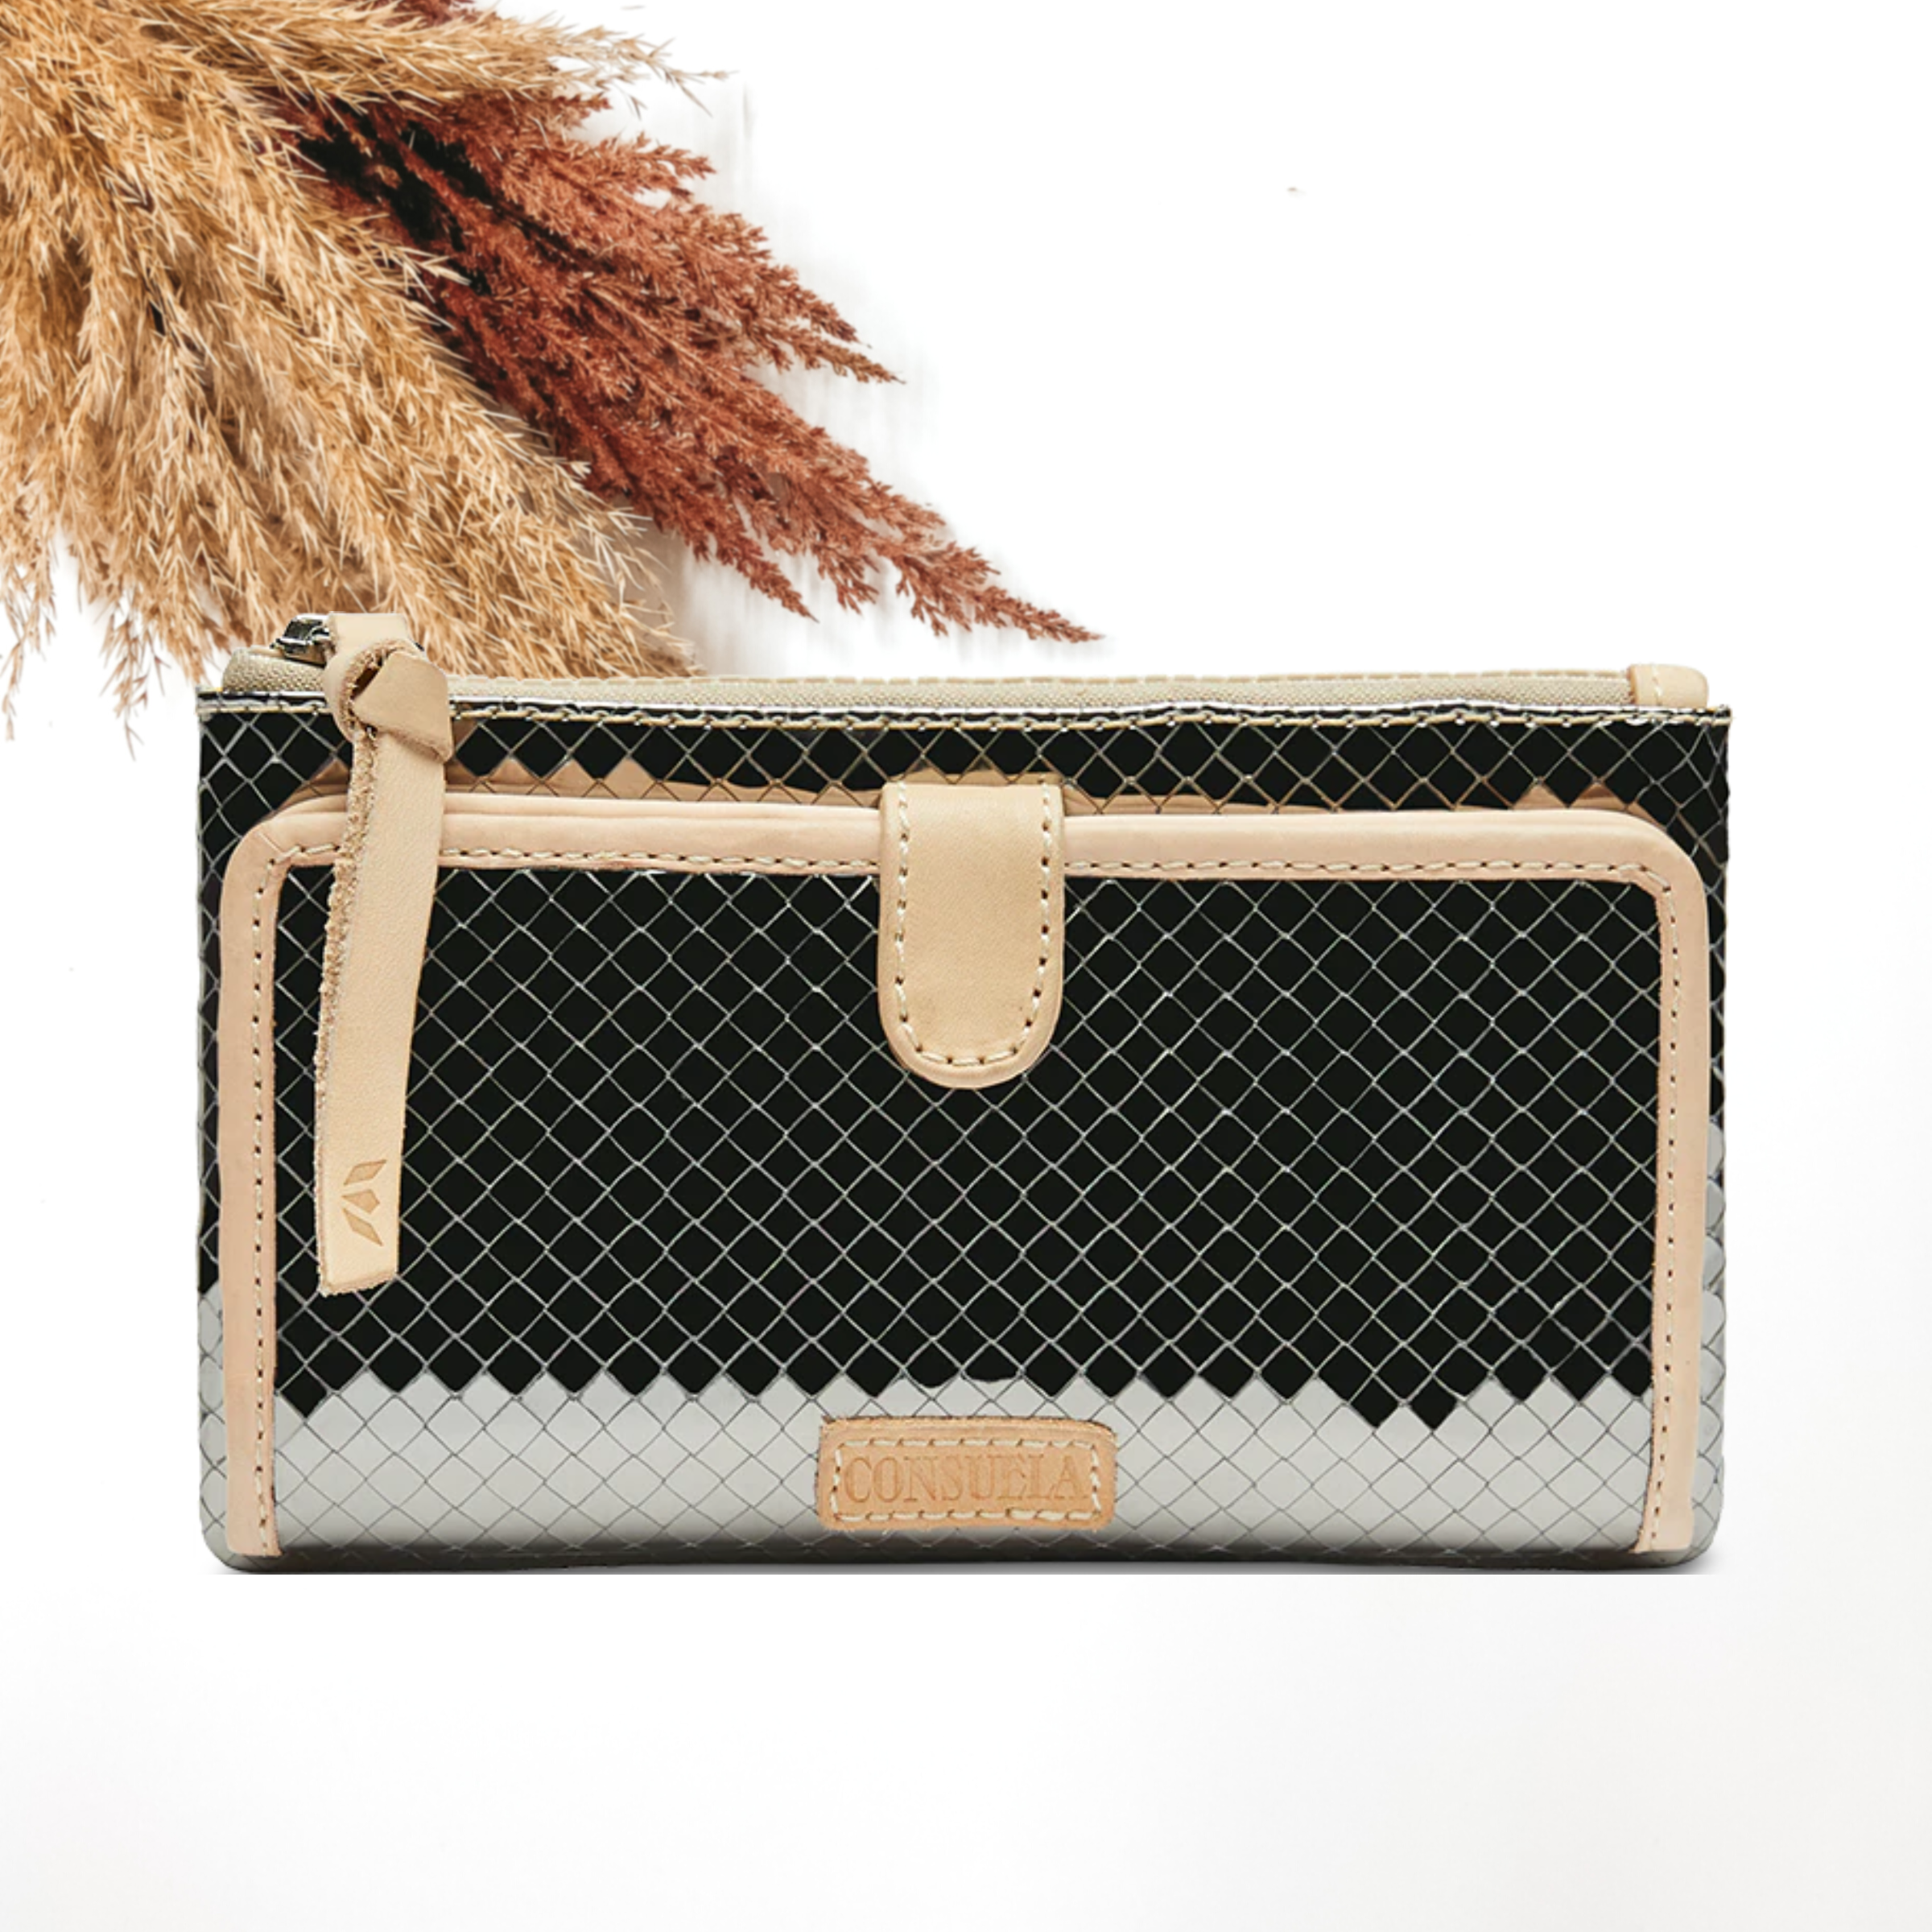 Pictured is a rectangle wallet that has a silver, gunmetal stitched print design. This wallet includes a front flap with a light tan outline and a top zipper with a light tan zipper pull. This wallet is pictured on a white background with pompous grass in the top left corner.